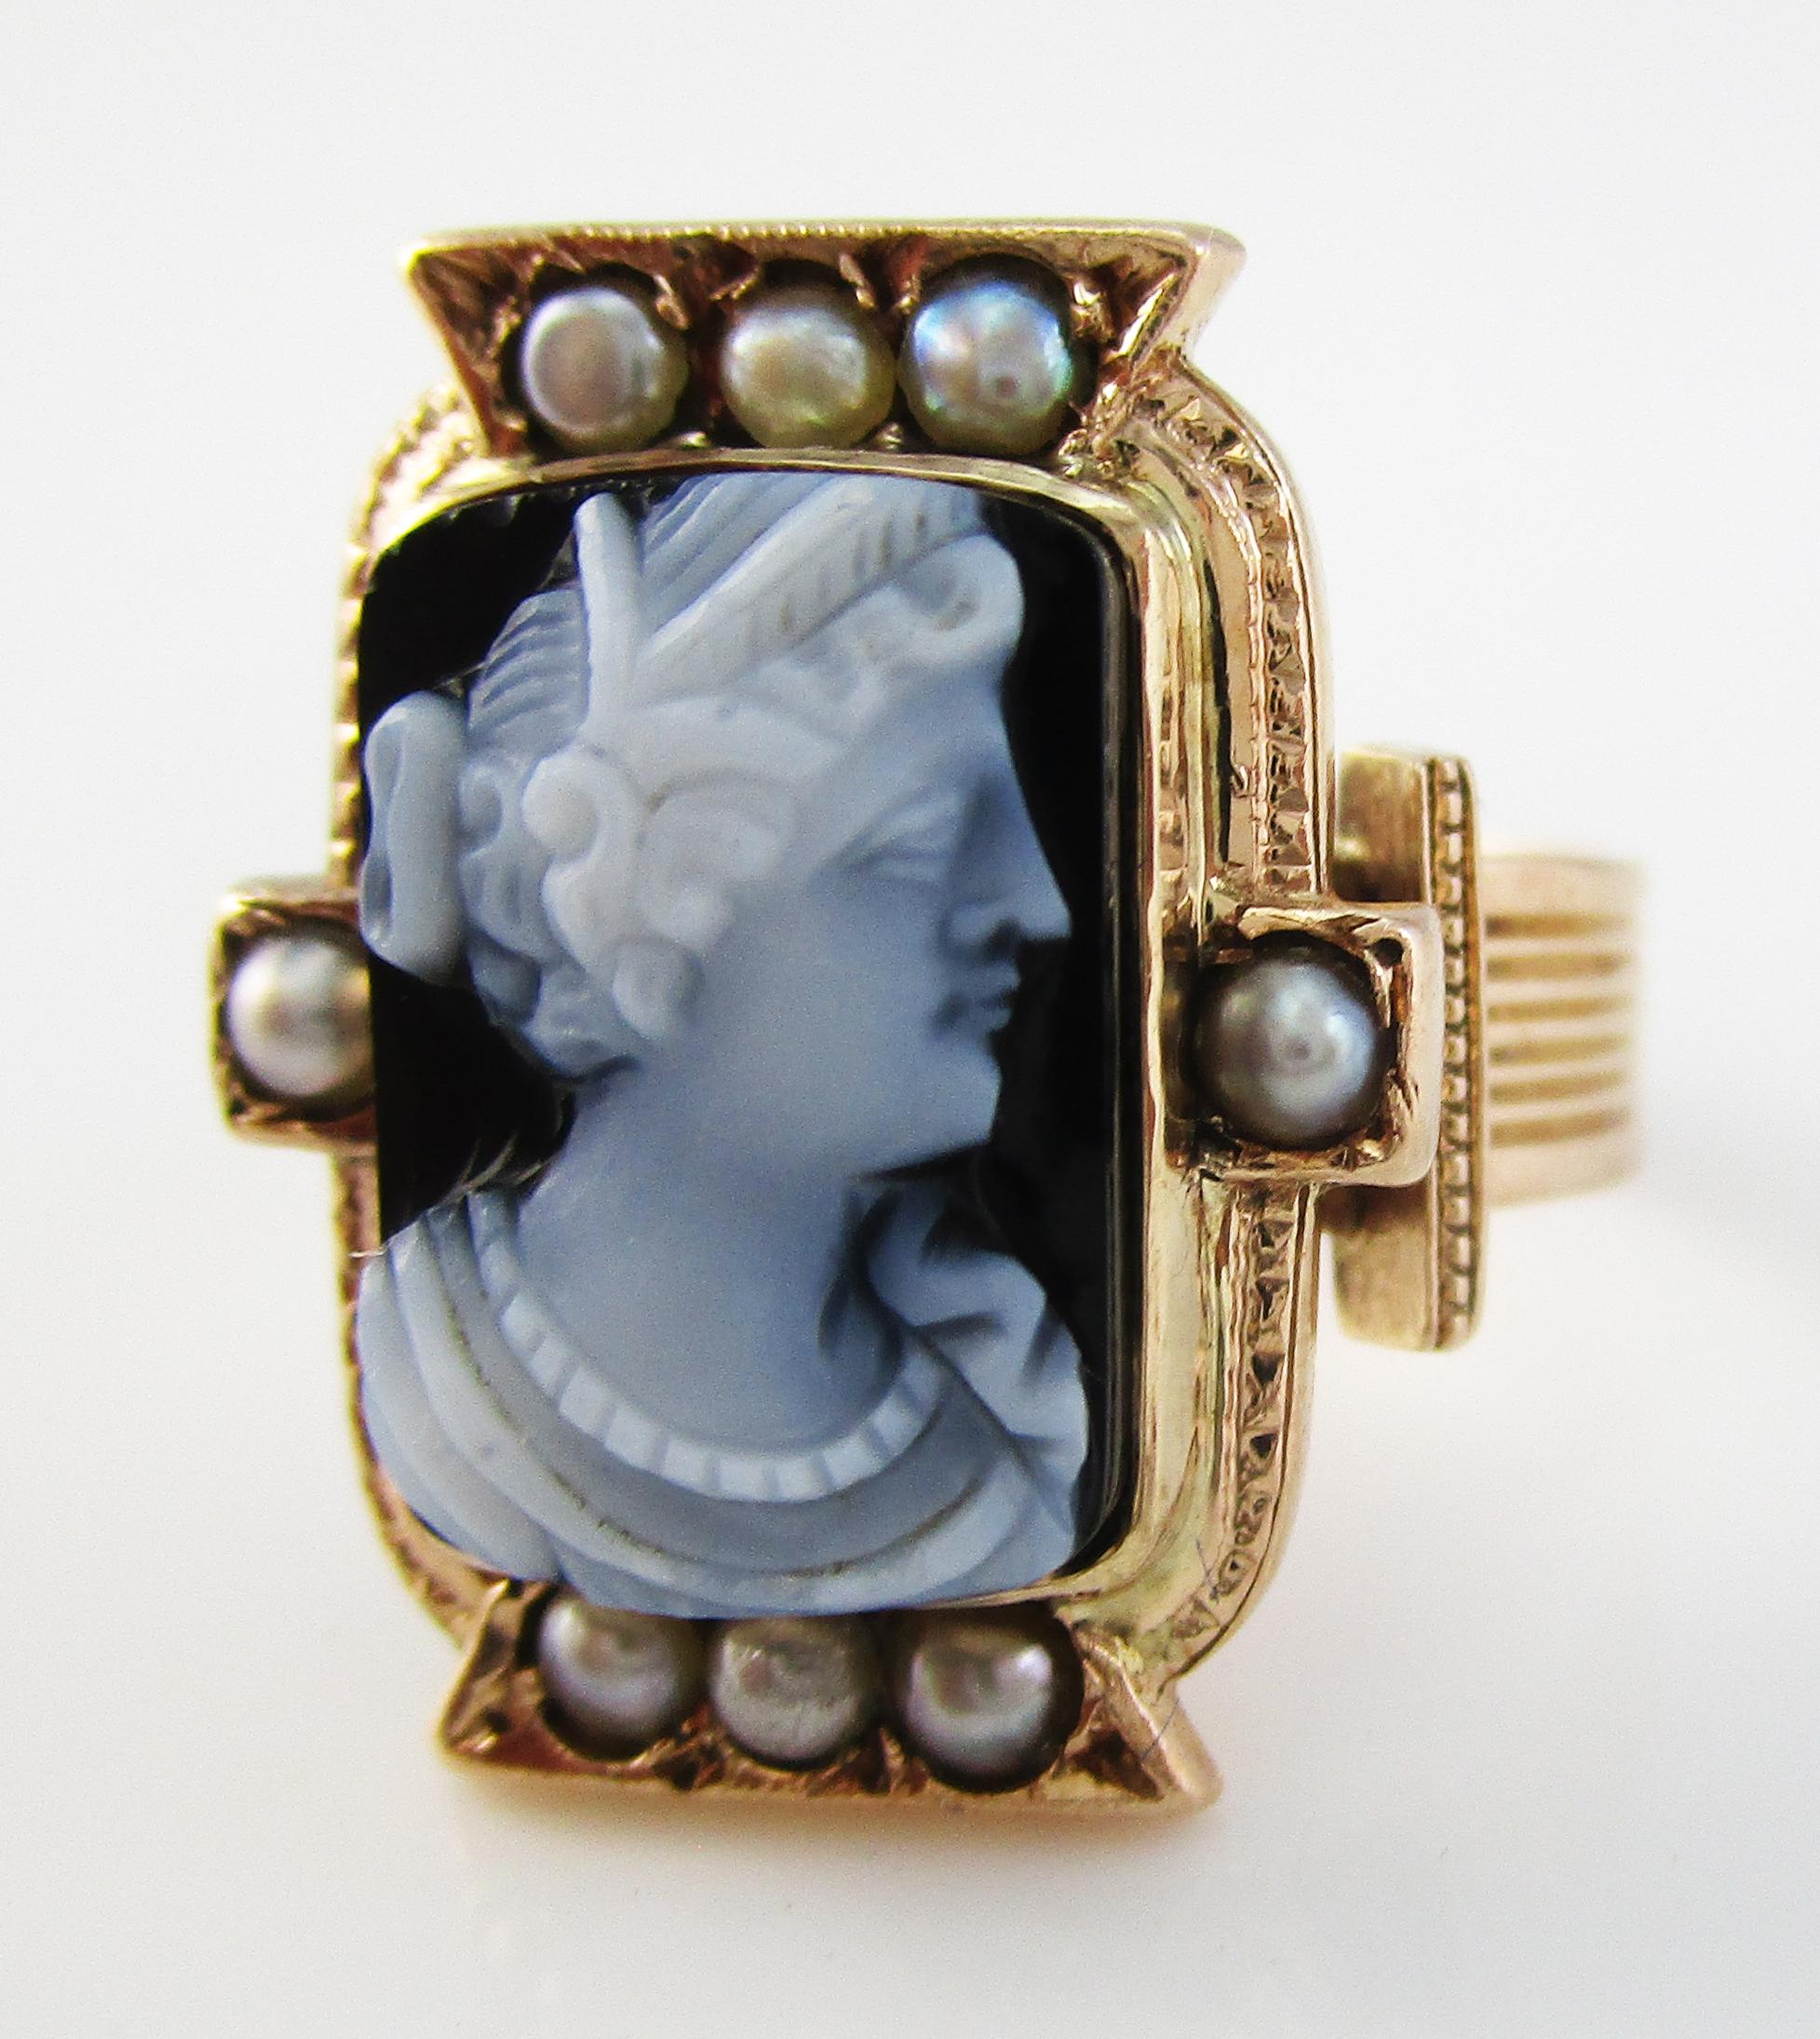 Etruscan Revival 1870 Victorian 14 Karat Rose Gold Agate Cameo Band Ring with Pearl Border